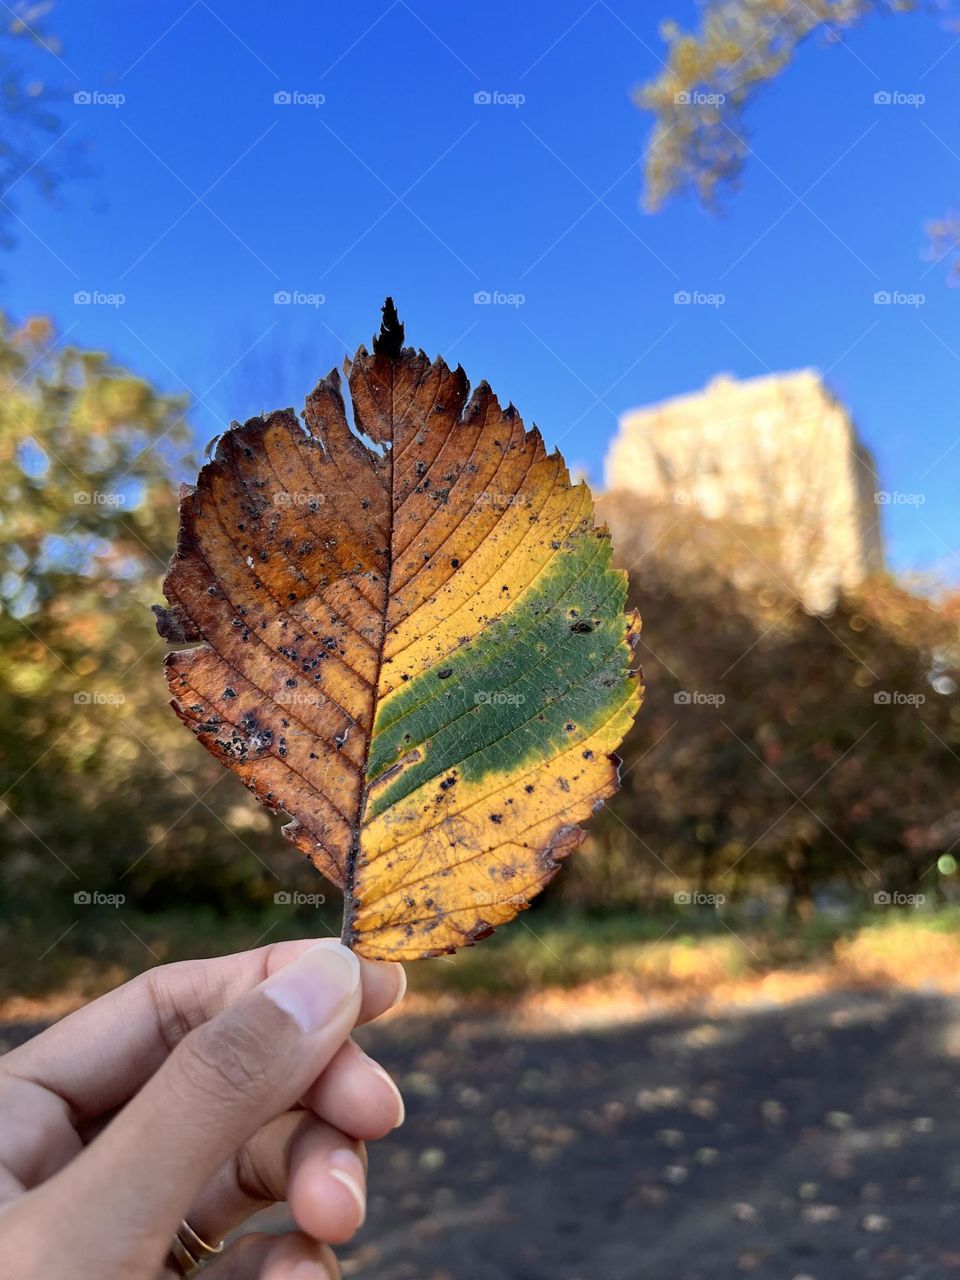 A person holding an autumn leaf with sky and building background.